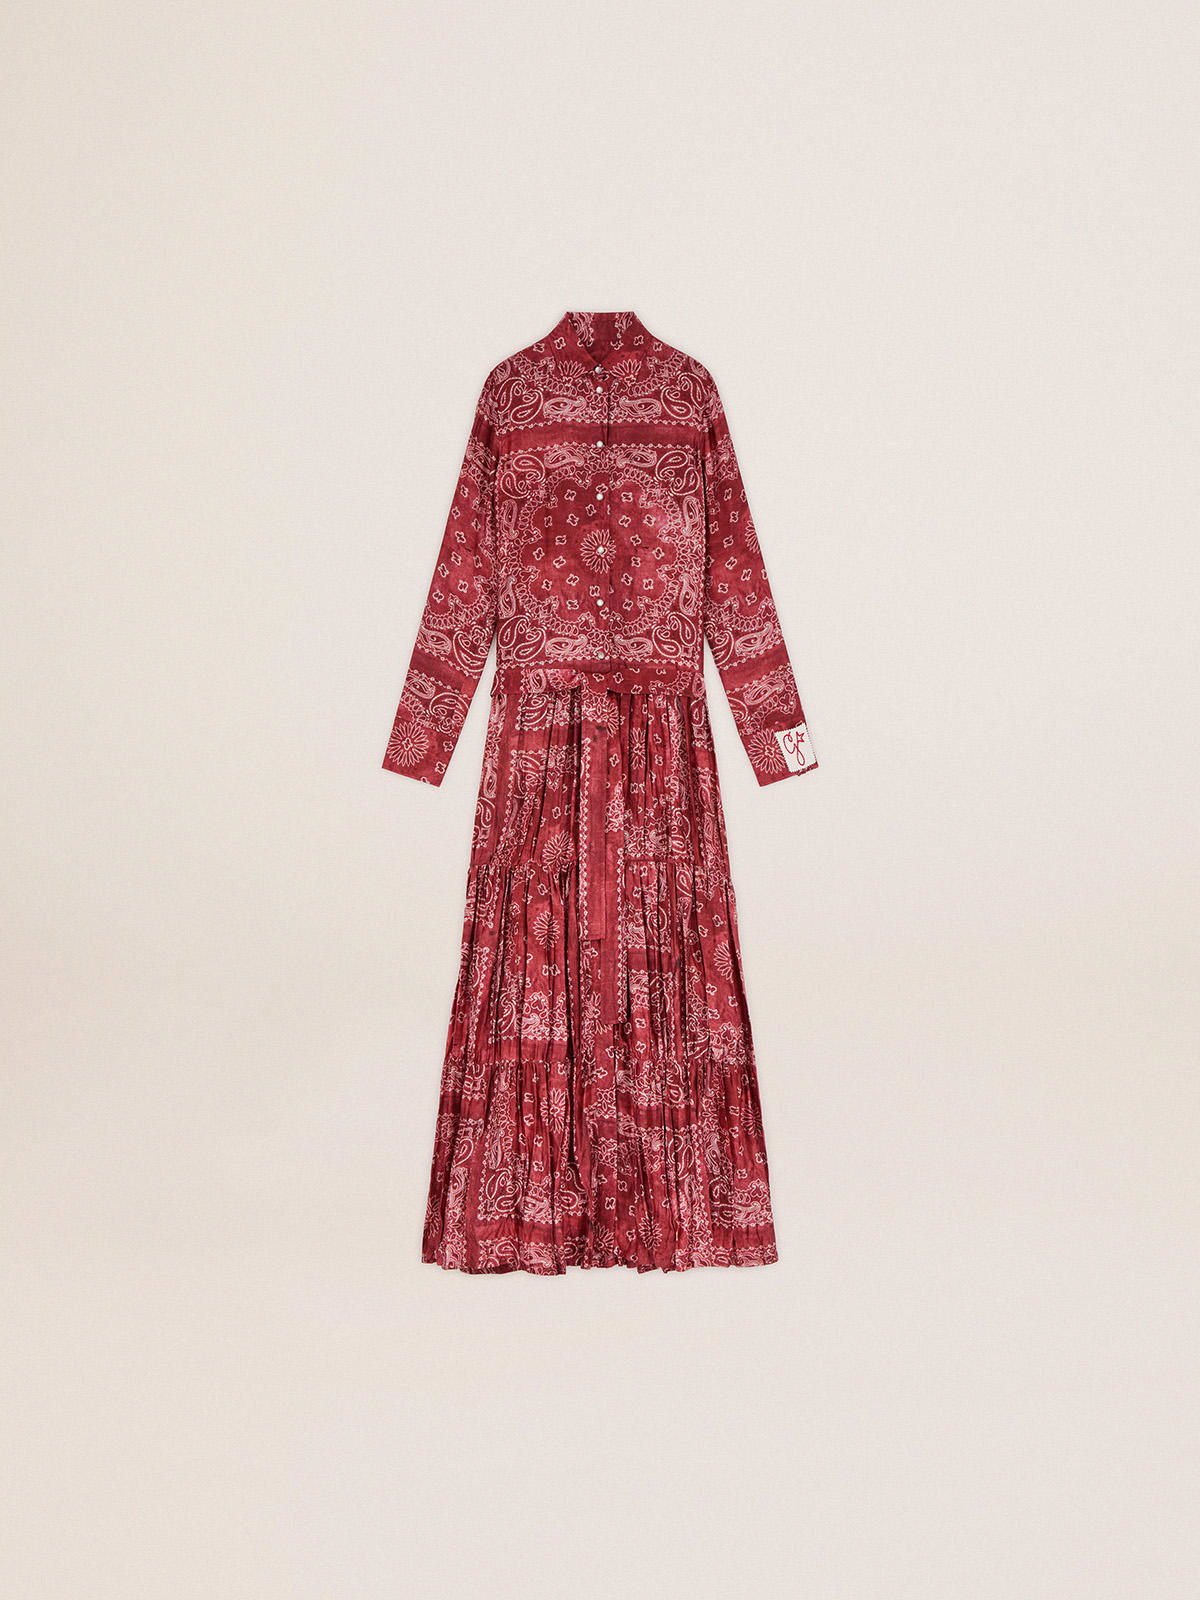 Golden Collection shirt dress in burgundy with paisley print